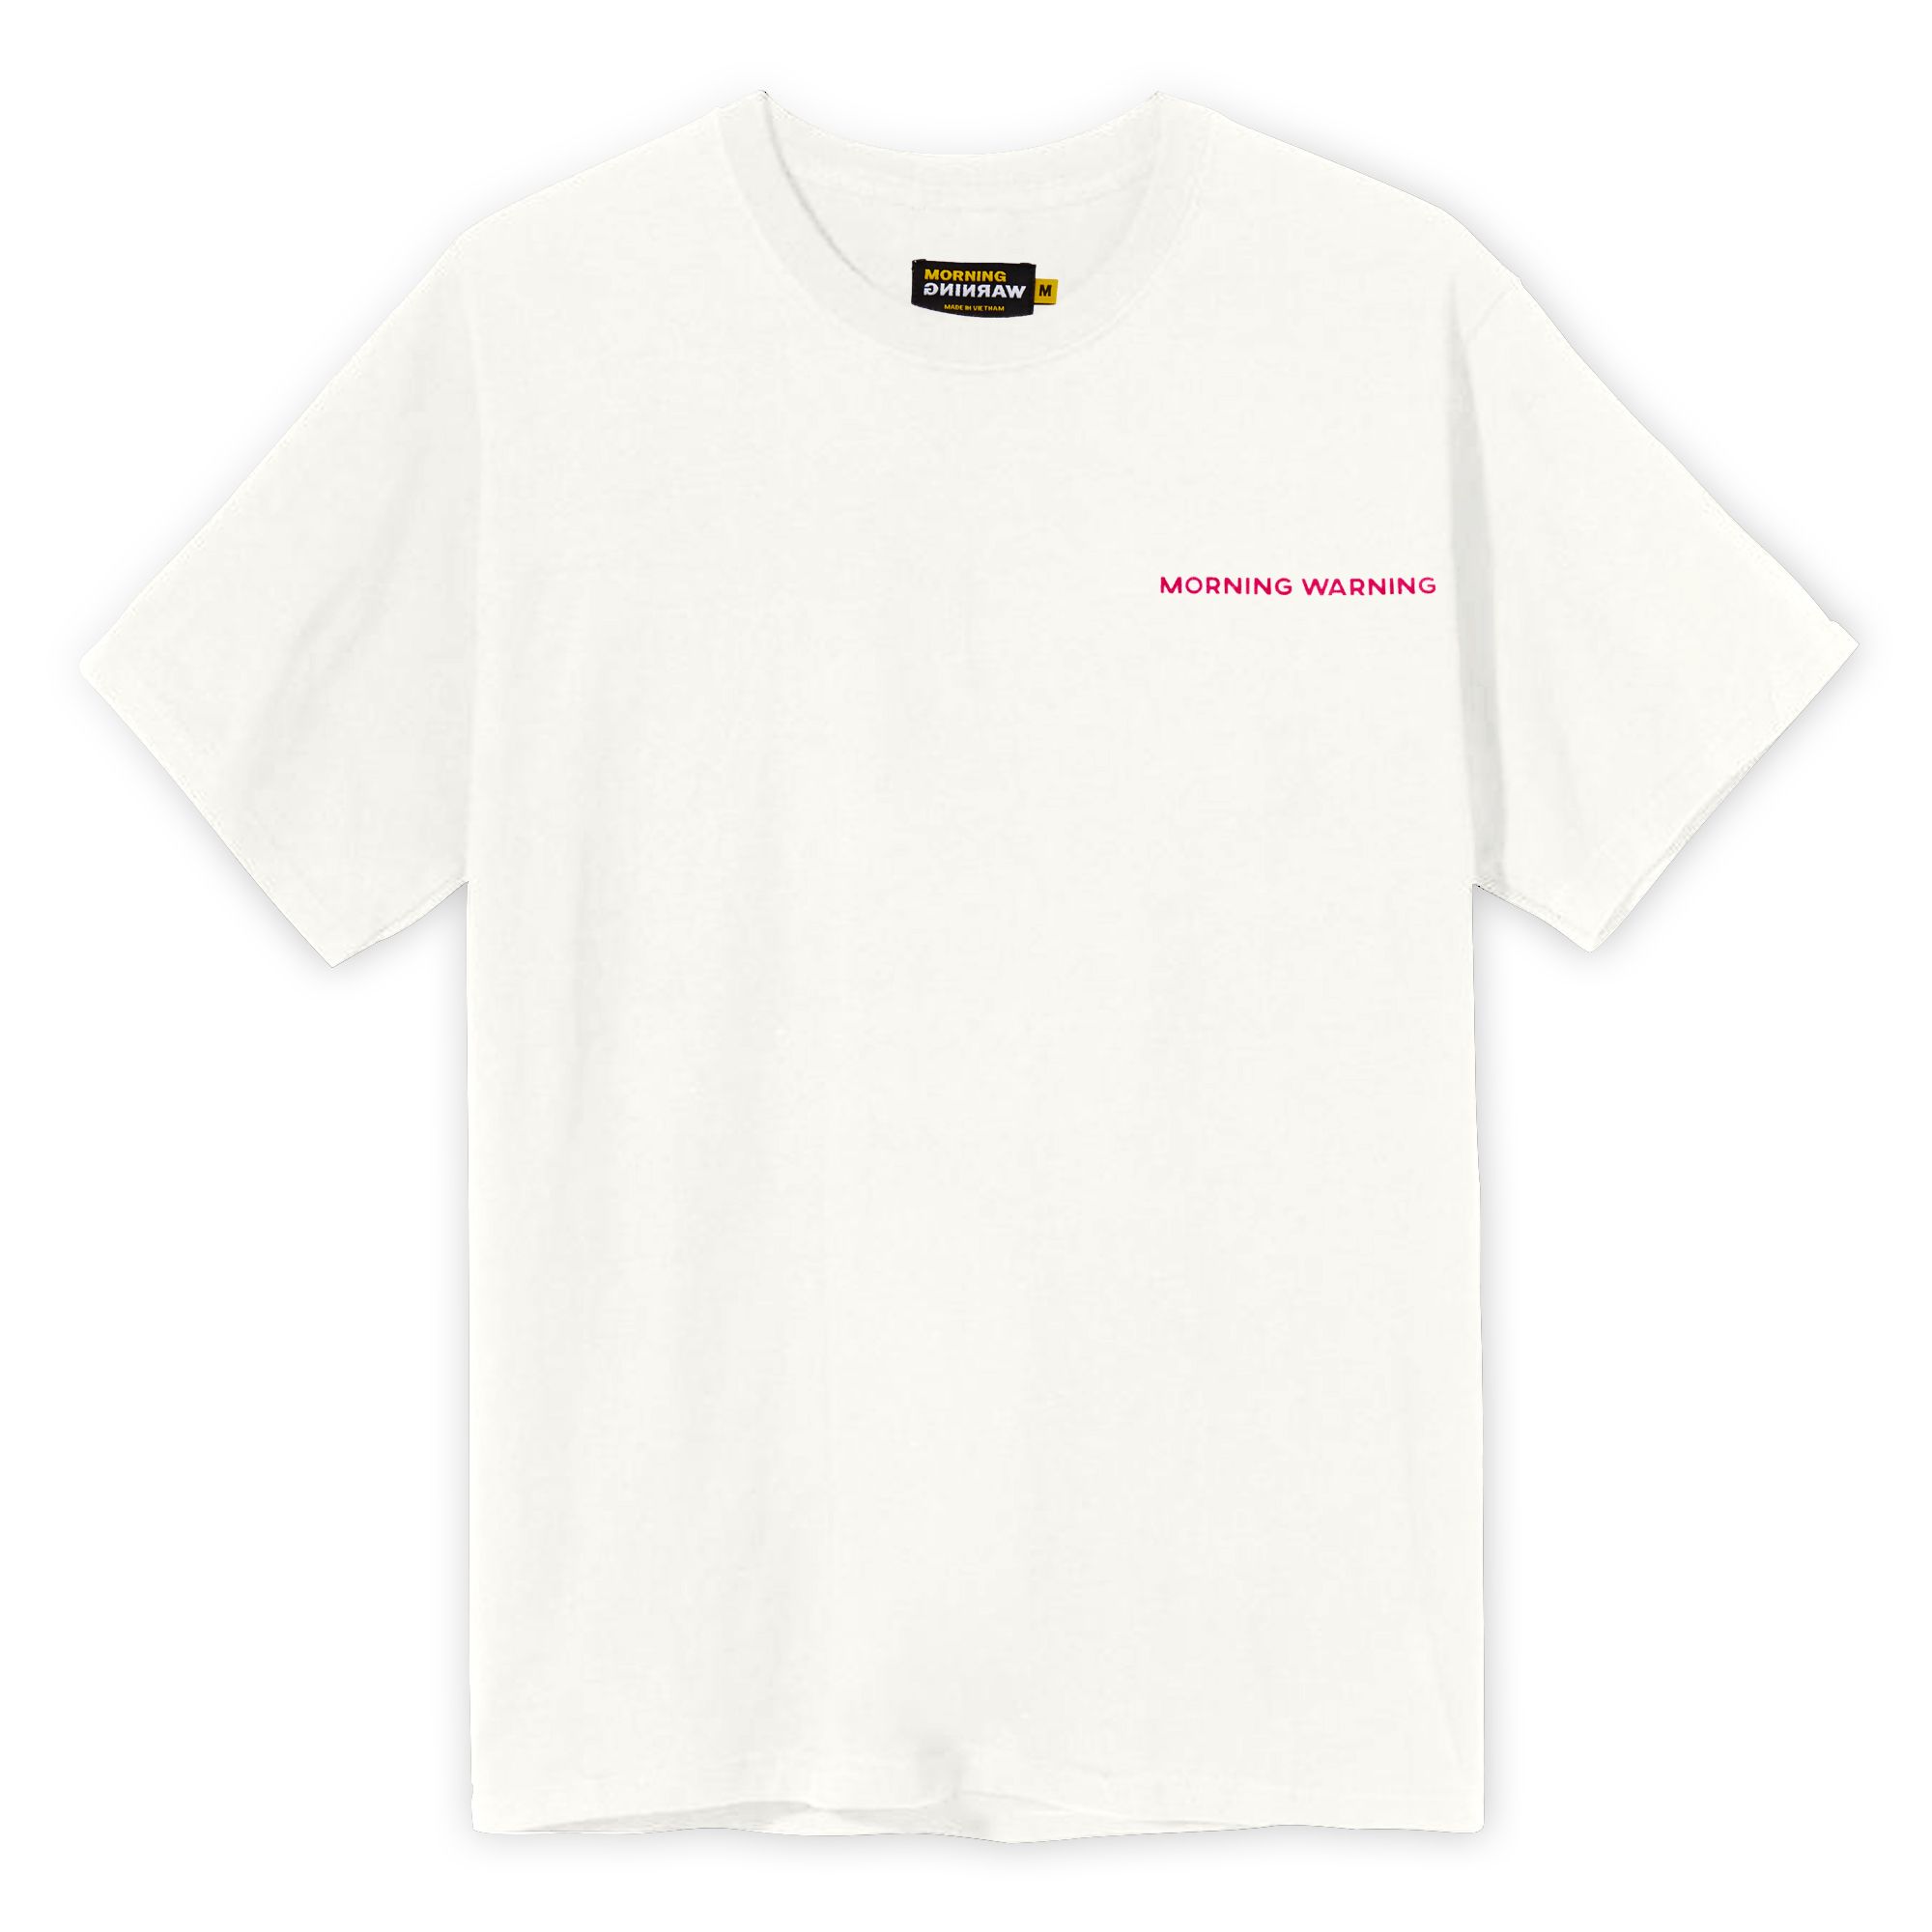  Most Wanted Kids Tee - White 